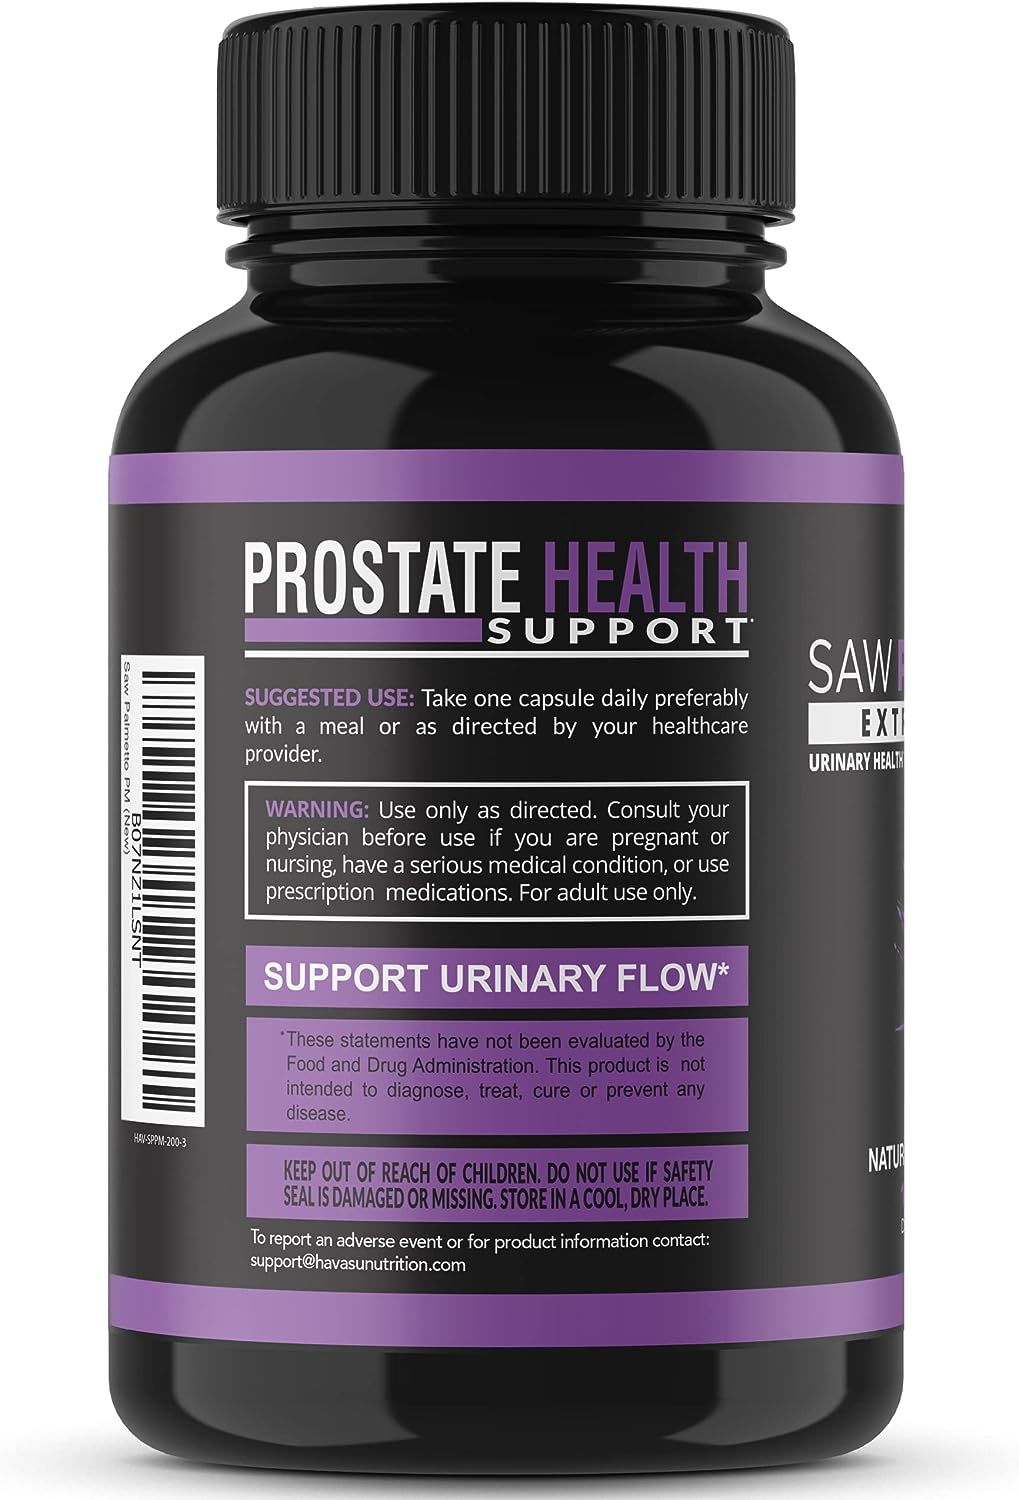 HAVASU NUTRITION Saw Palmetto and L Arginine Herbal Supplements as Potent DHT Blocker and Libido Booster for Ultimate Male Enhancement Review